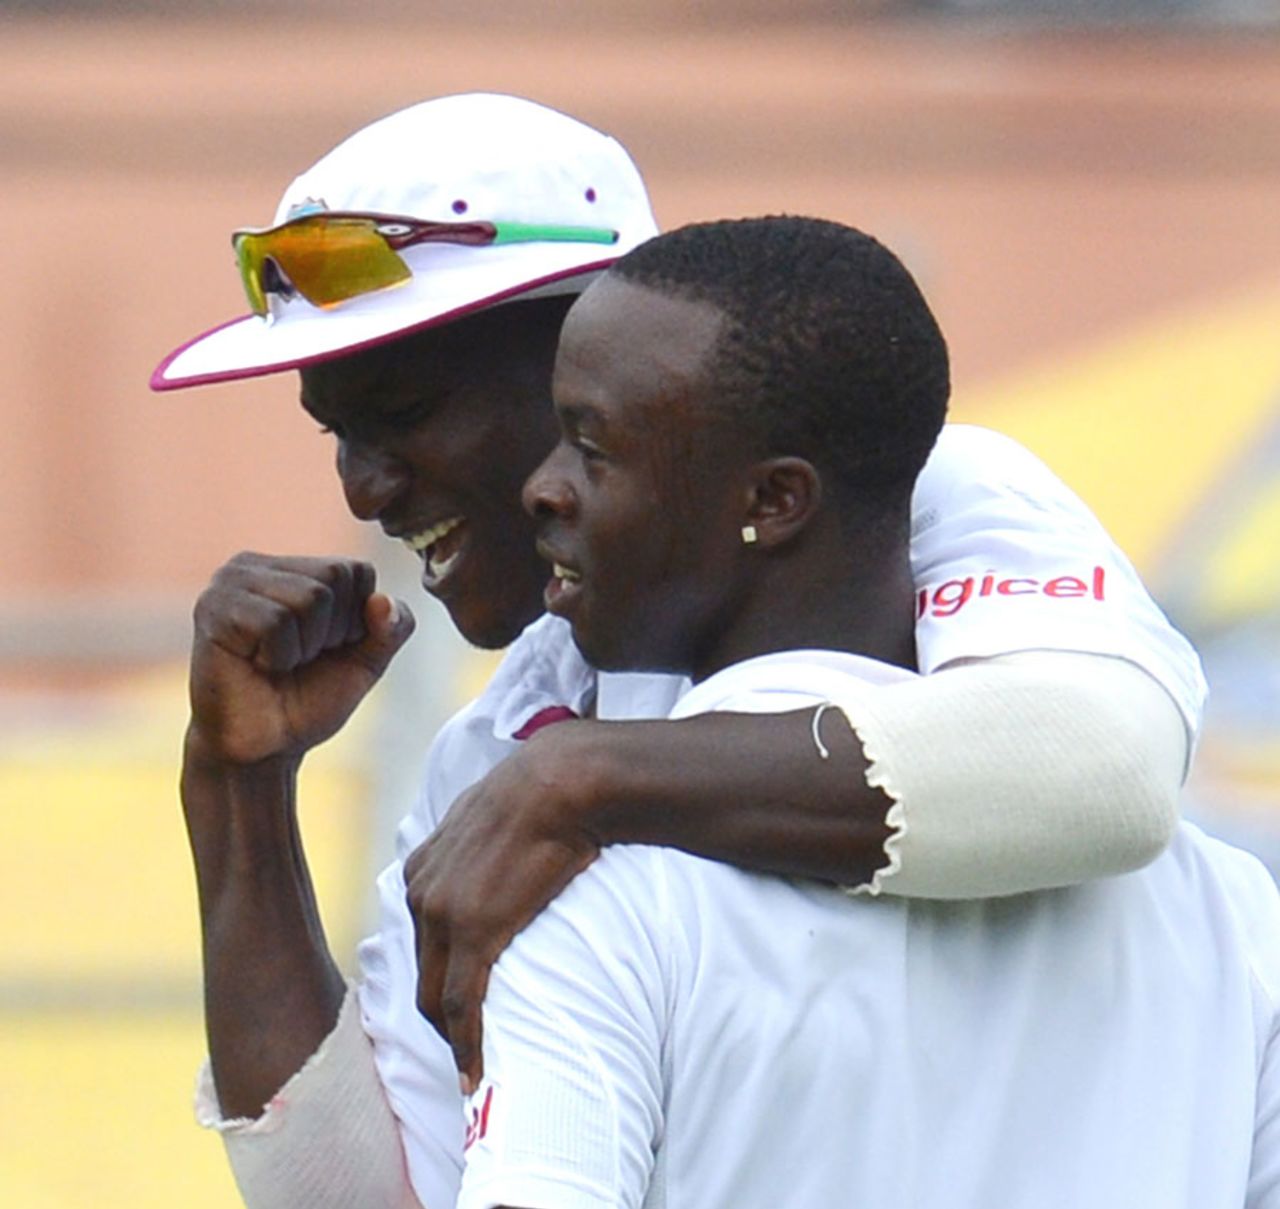 Kemar Roach took the first 10-wicket haul of his career, West Indies v Australia, 2nd Test, Port-of-Spain, April 19, 2012